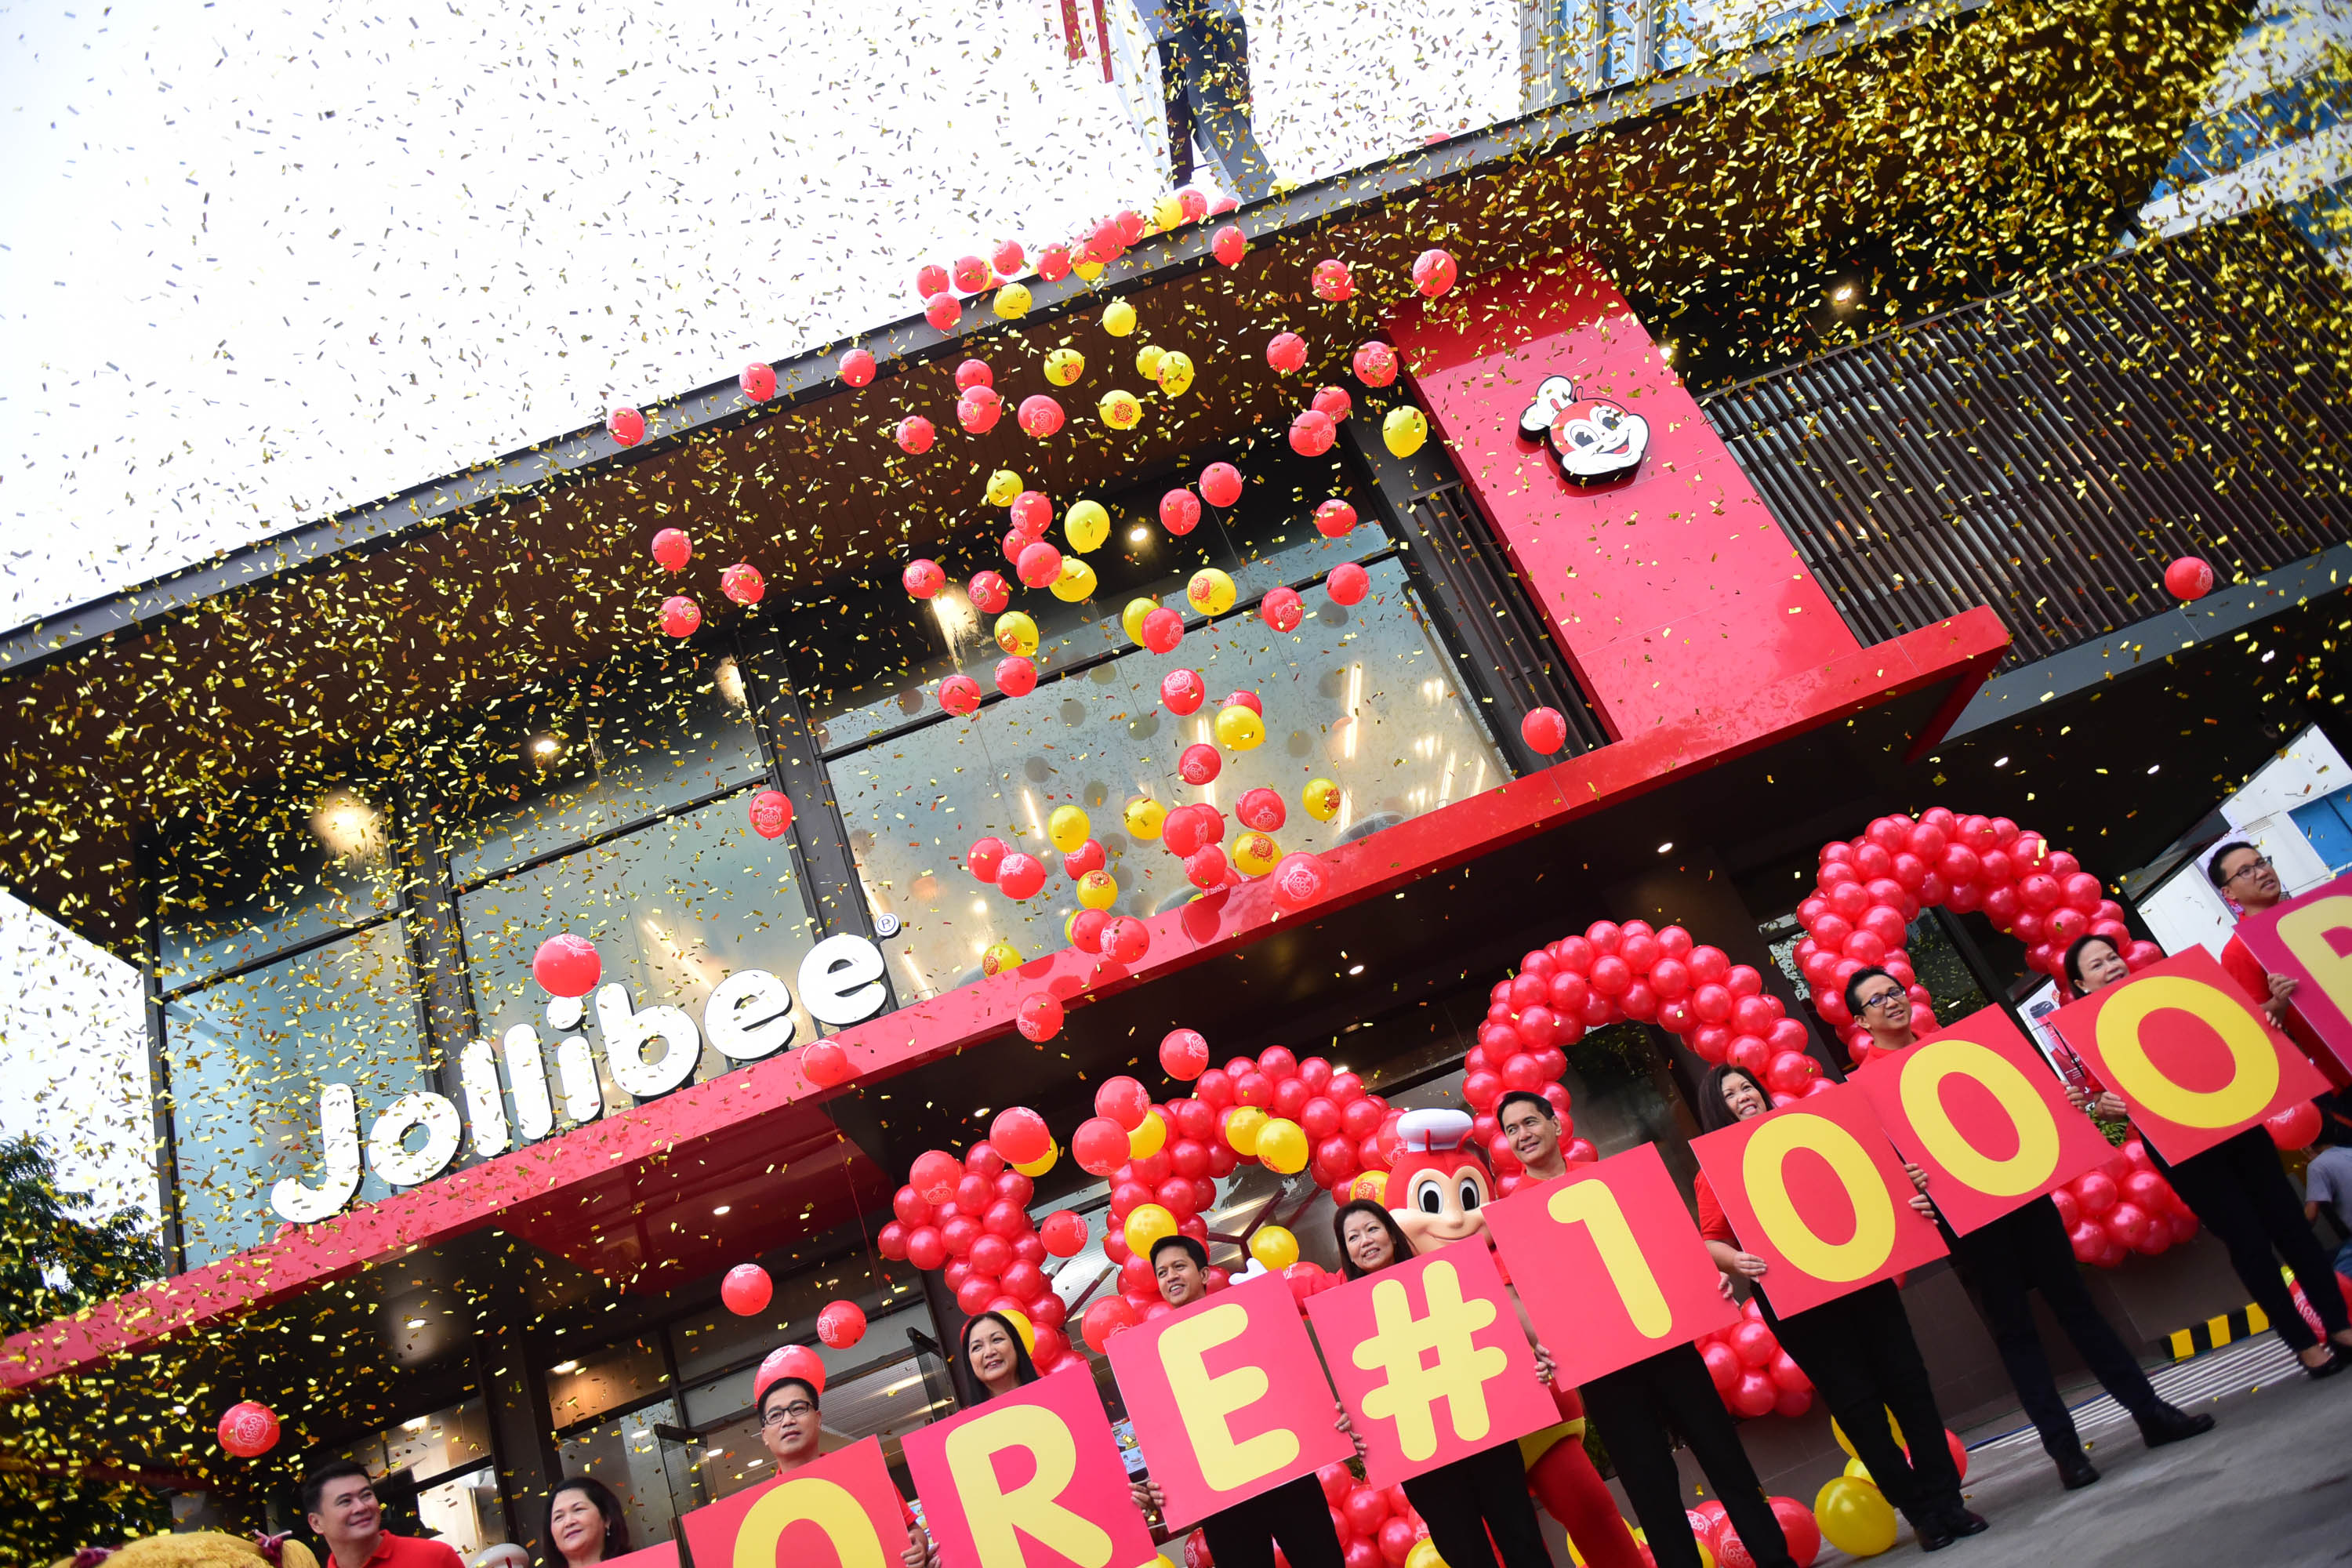 IN PHOTOS Jollibee opens its 1,000th store